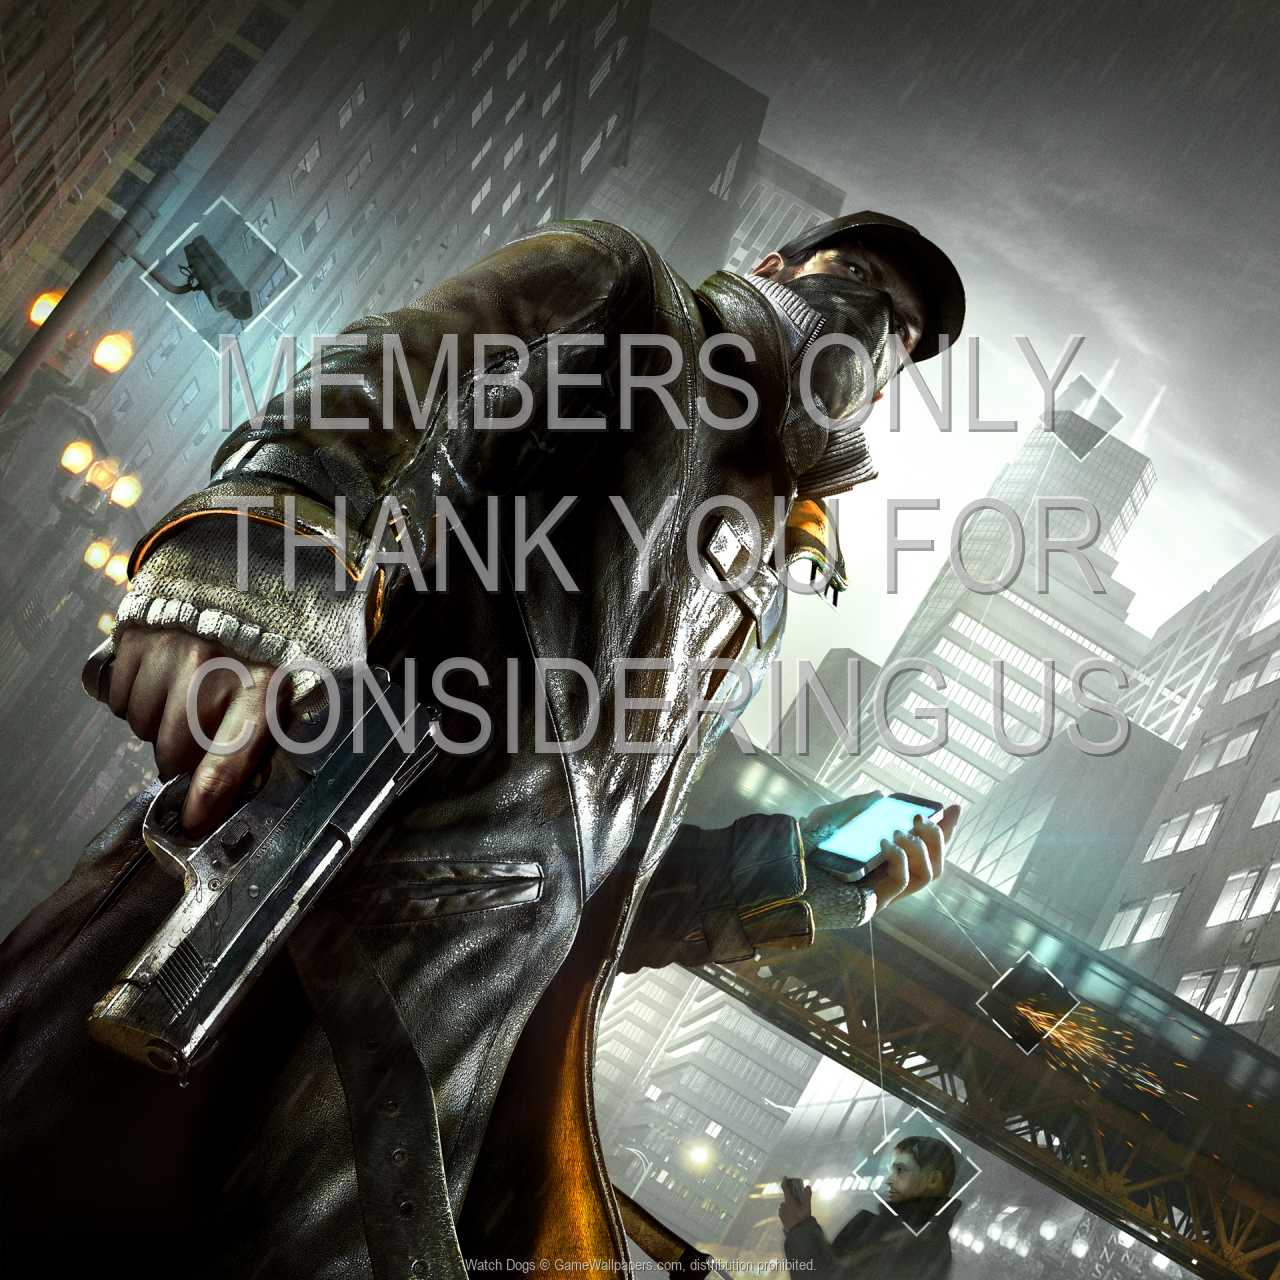 Watch Dogs 720p Horizontal Mobile wallpaper or background 02